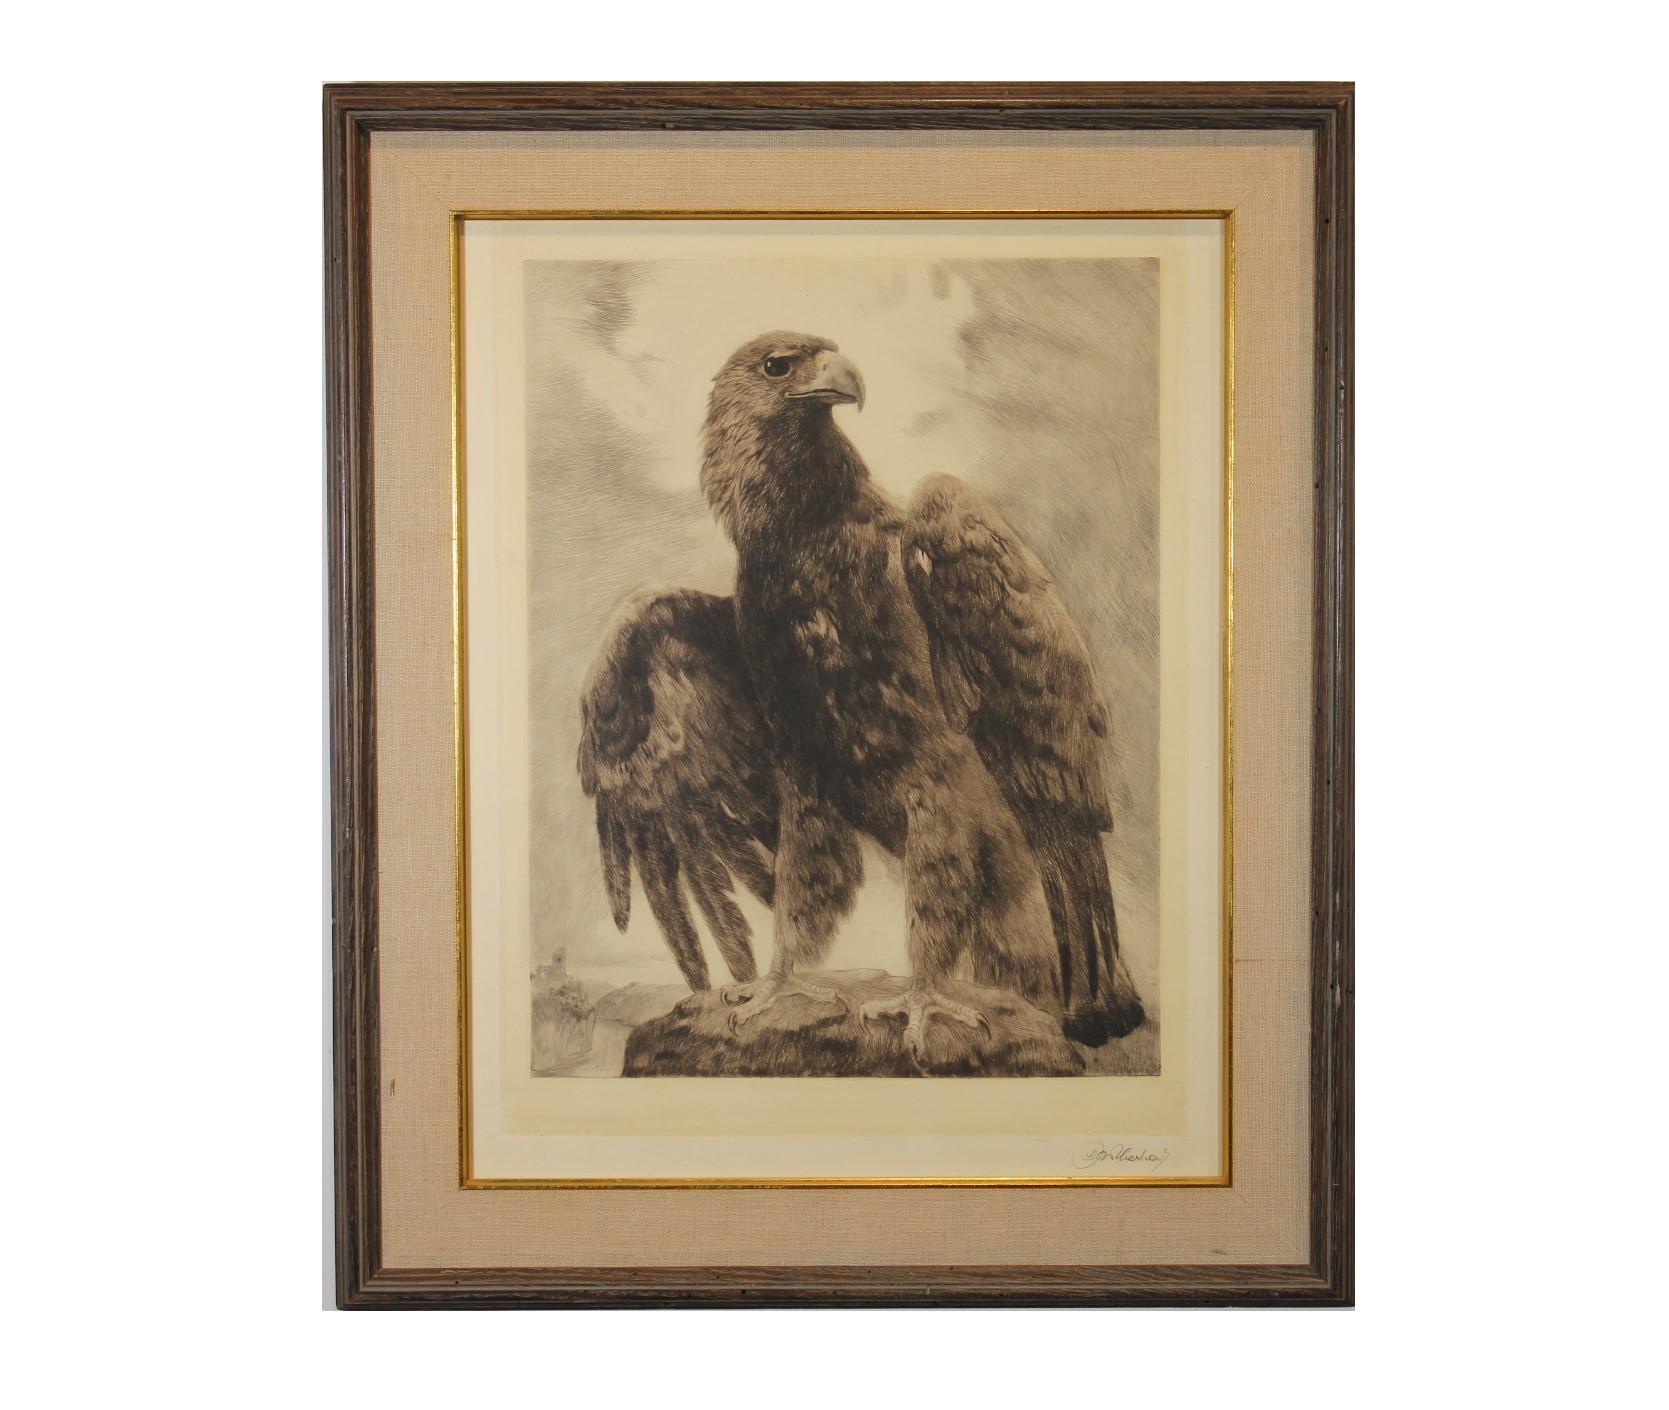 Natrualistic Eagle Etching  - Print by Curt Meyer- Eberhardt